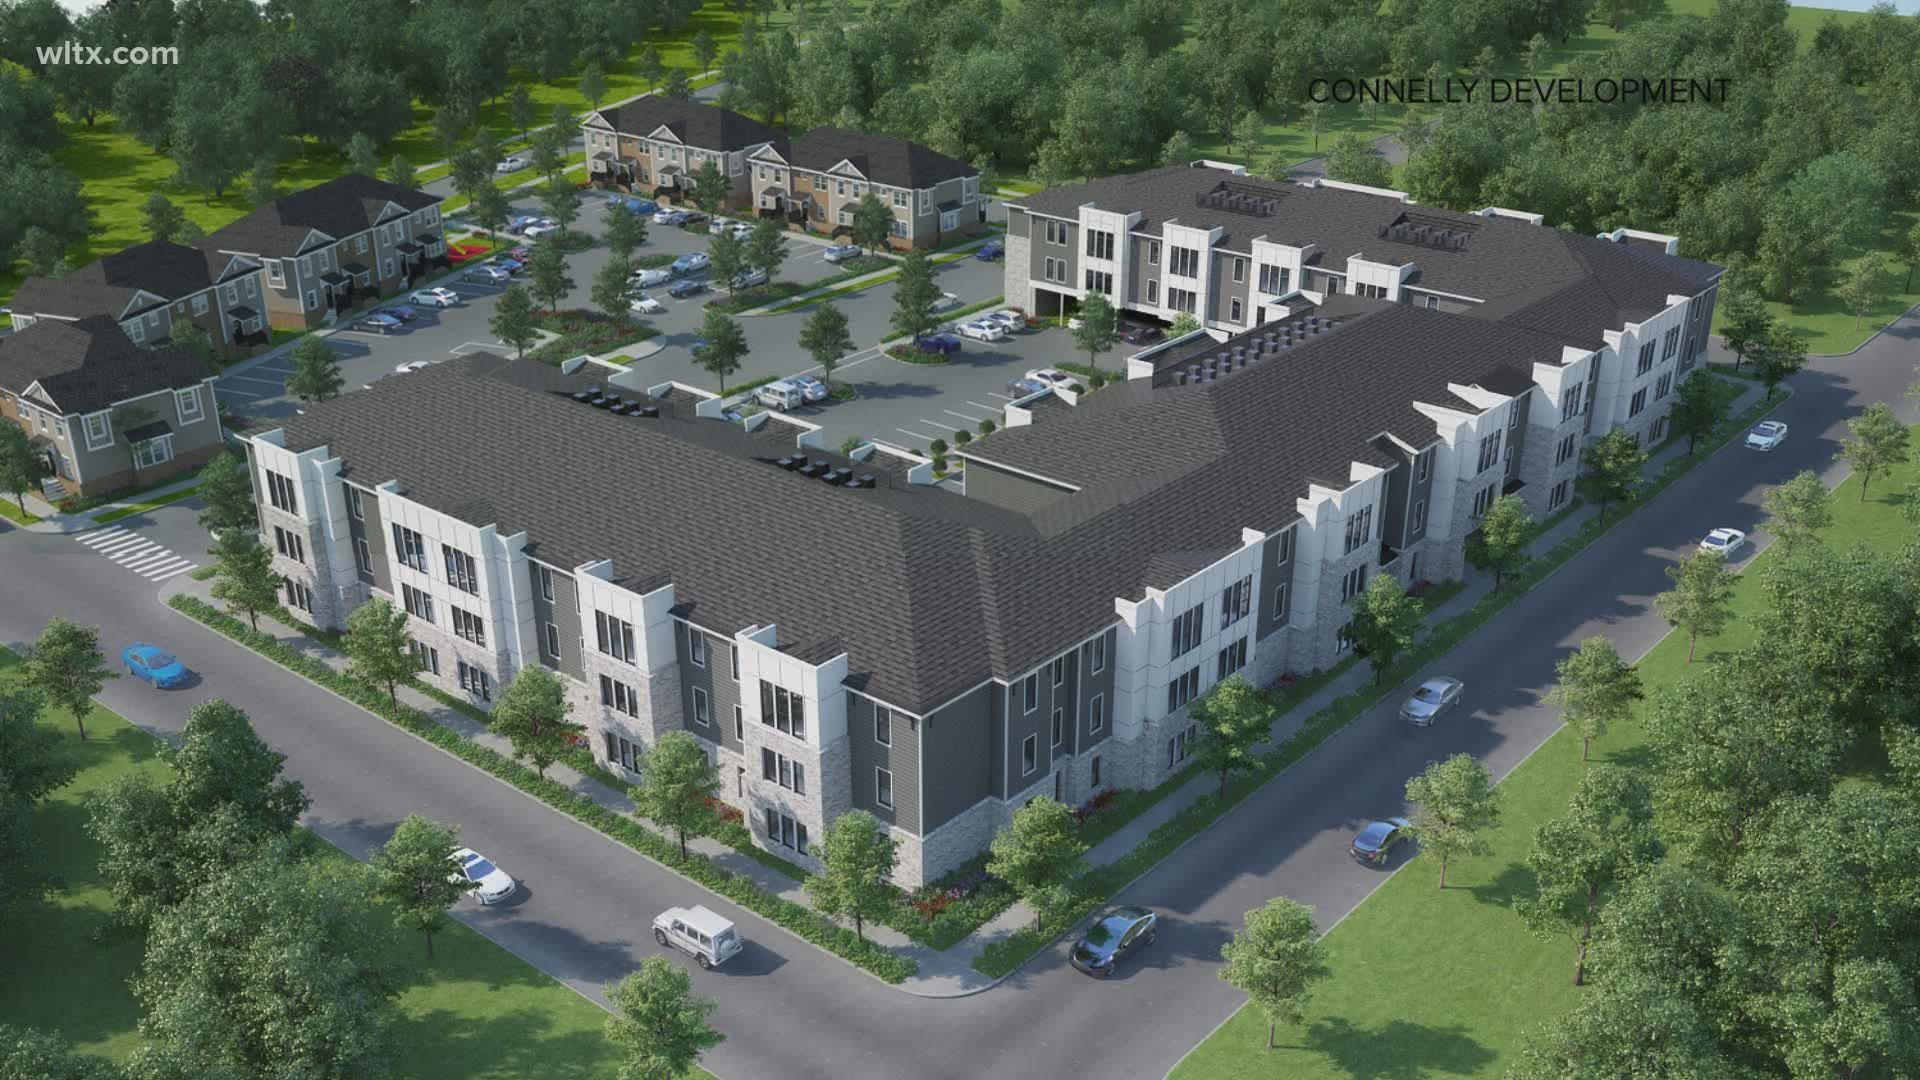 The Midtown at BullStreet development will feature 90 apartments near Page Ellington Park in Columbia.